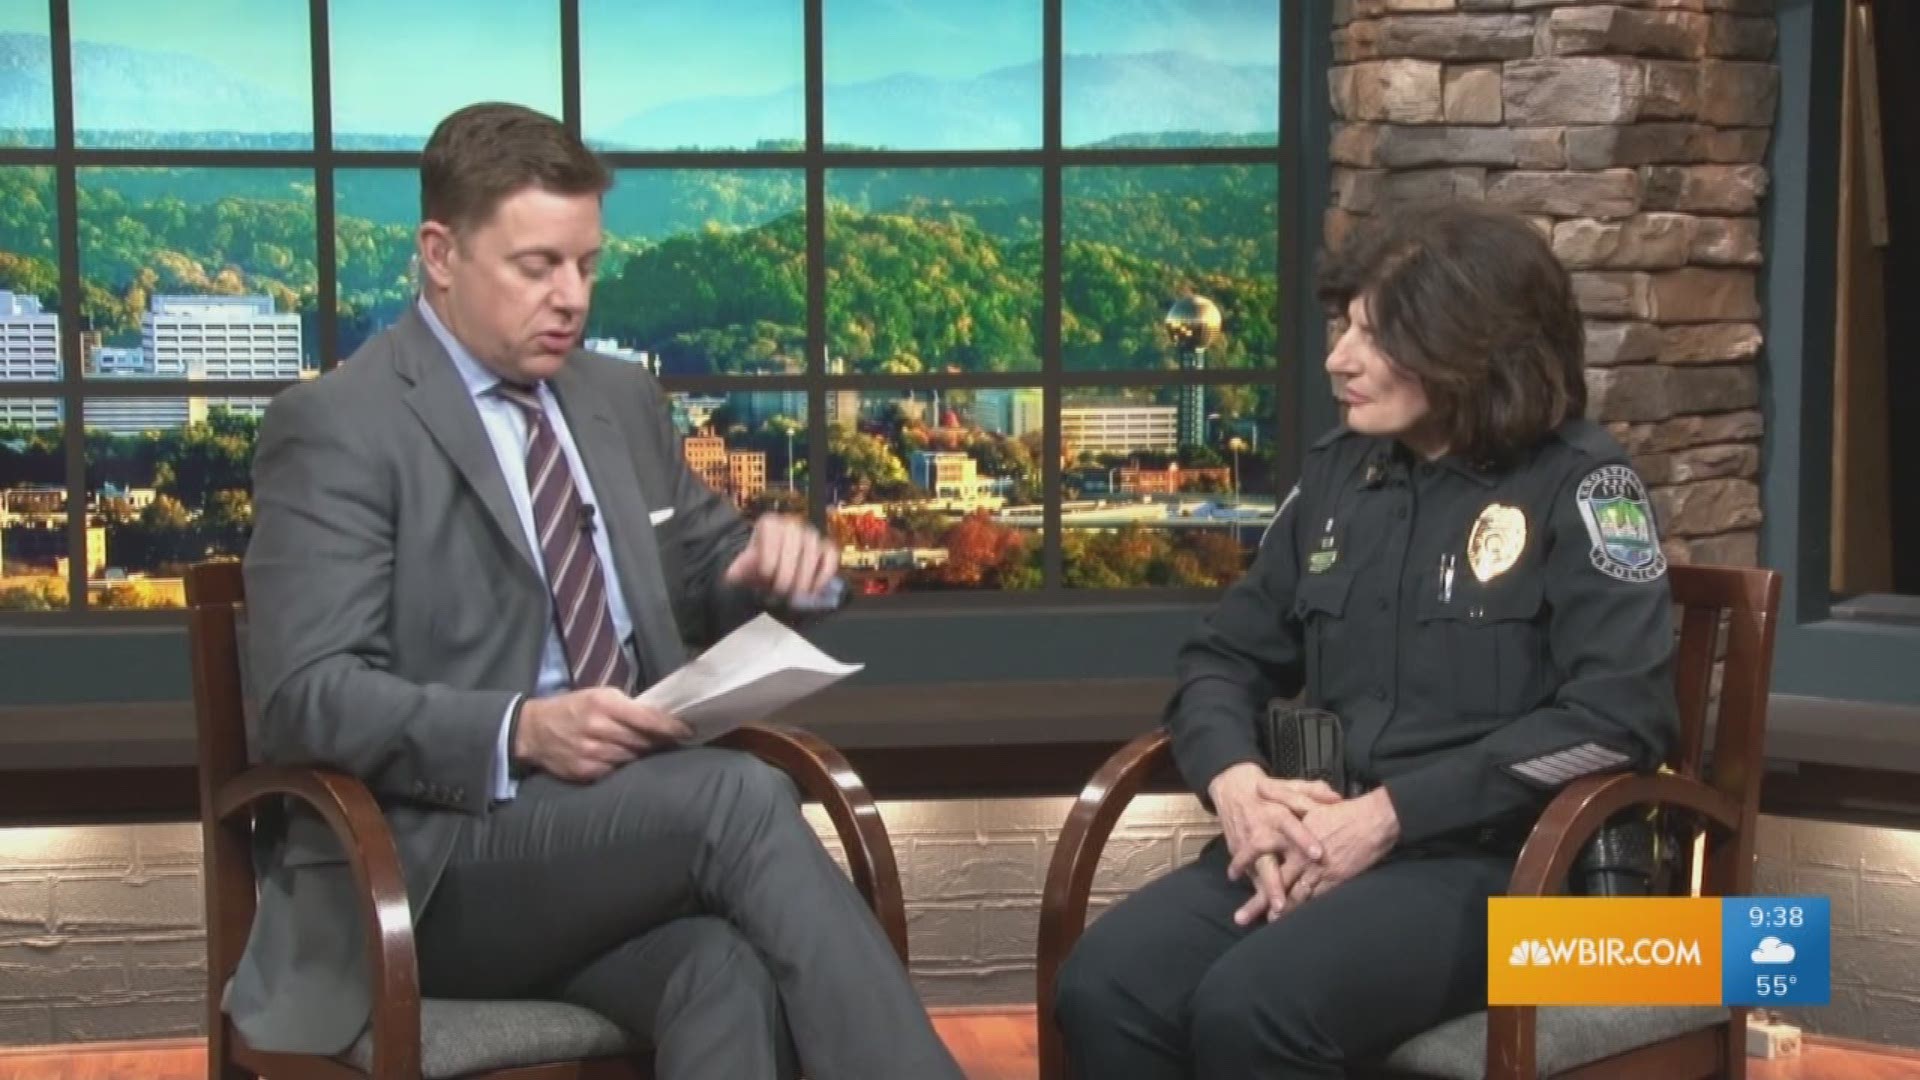 KPD Chief Eve Thomas talks about leading the department.